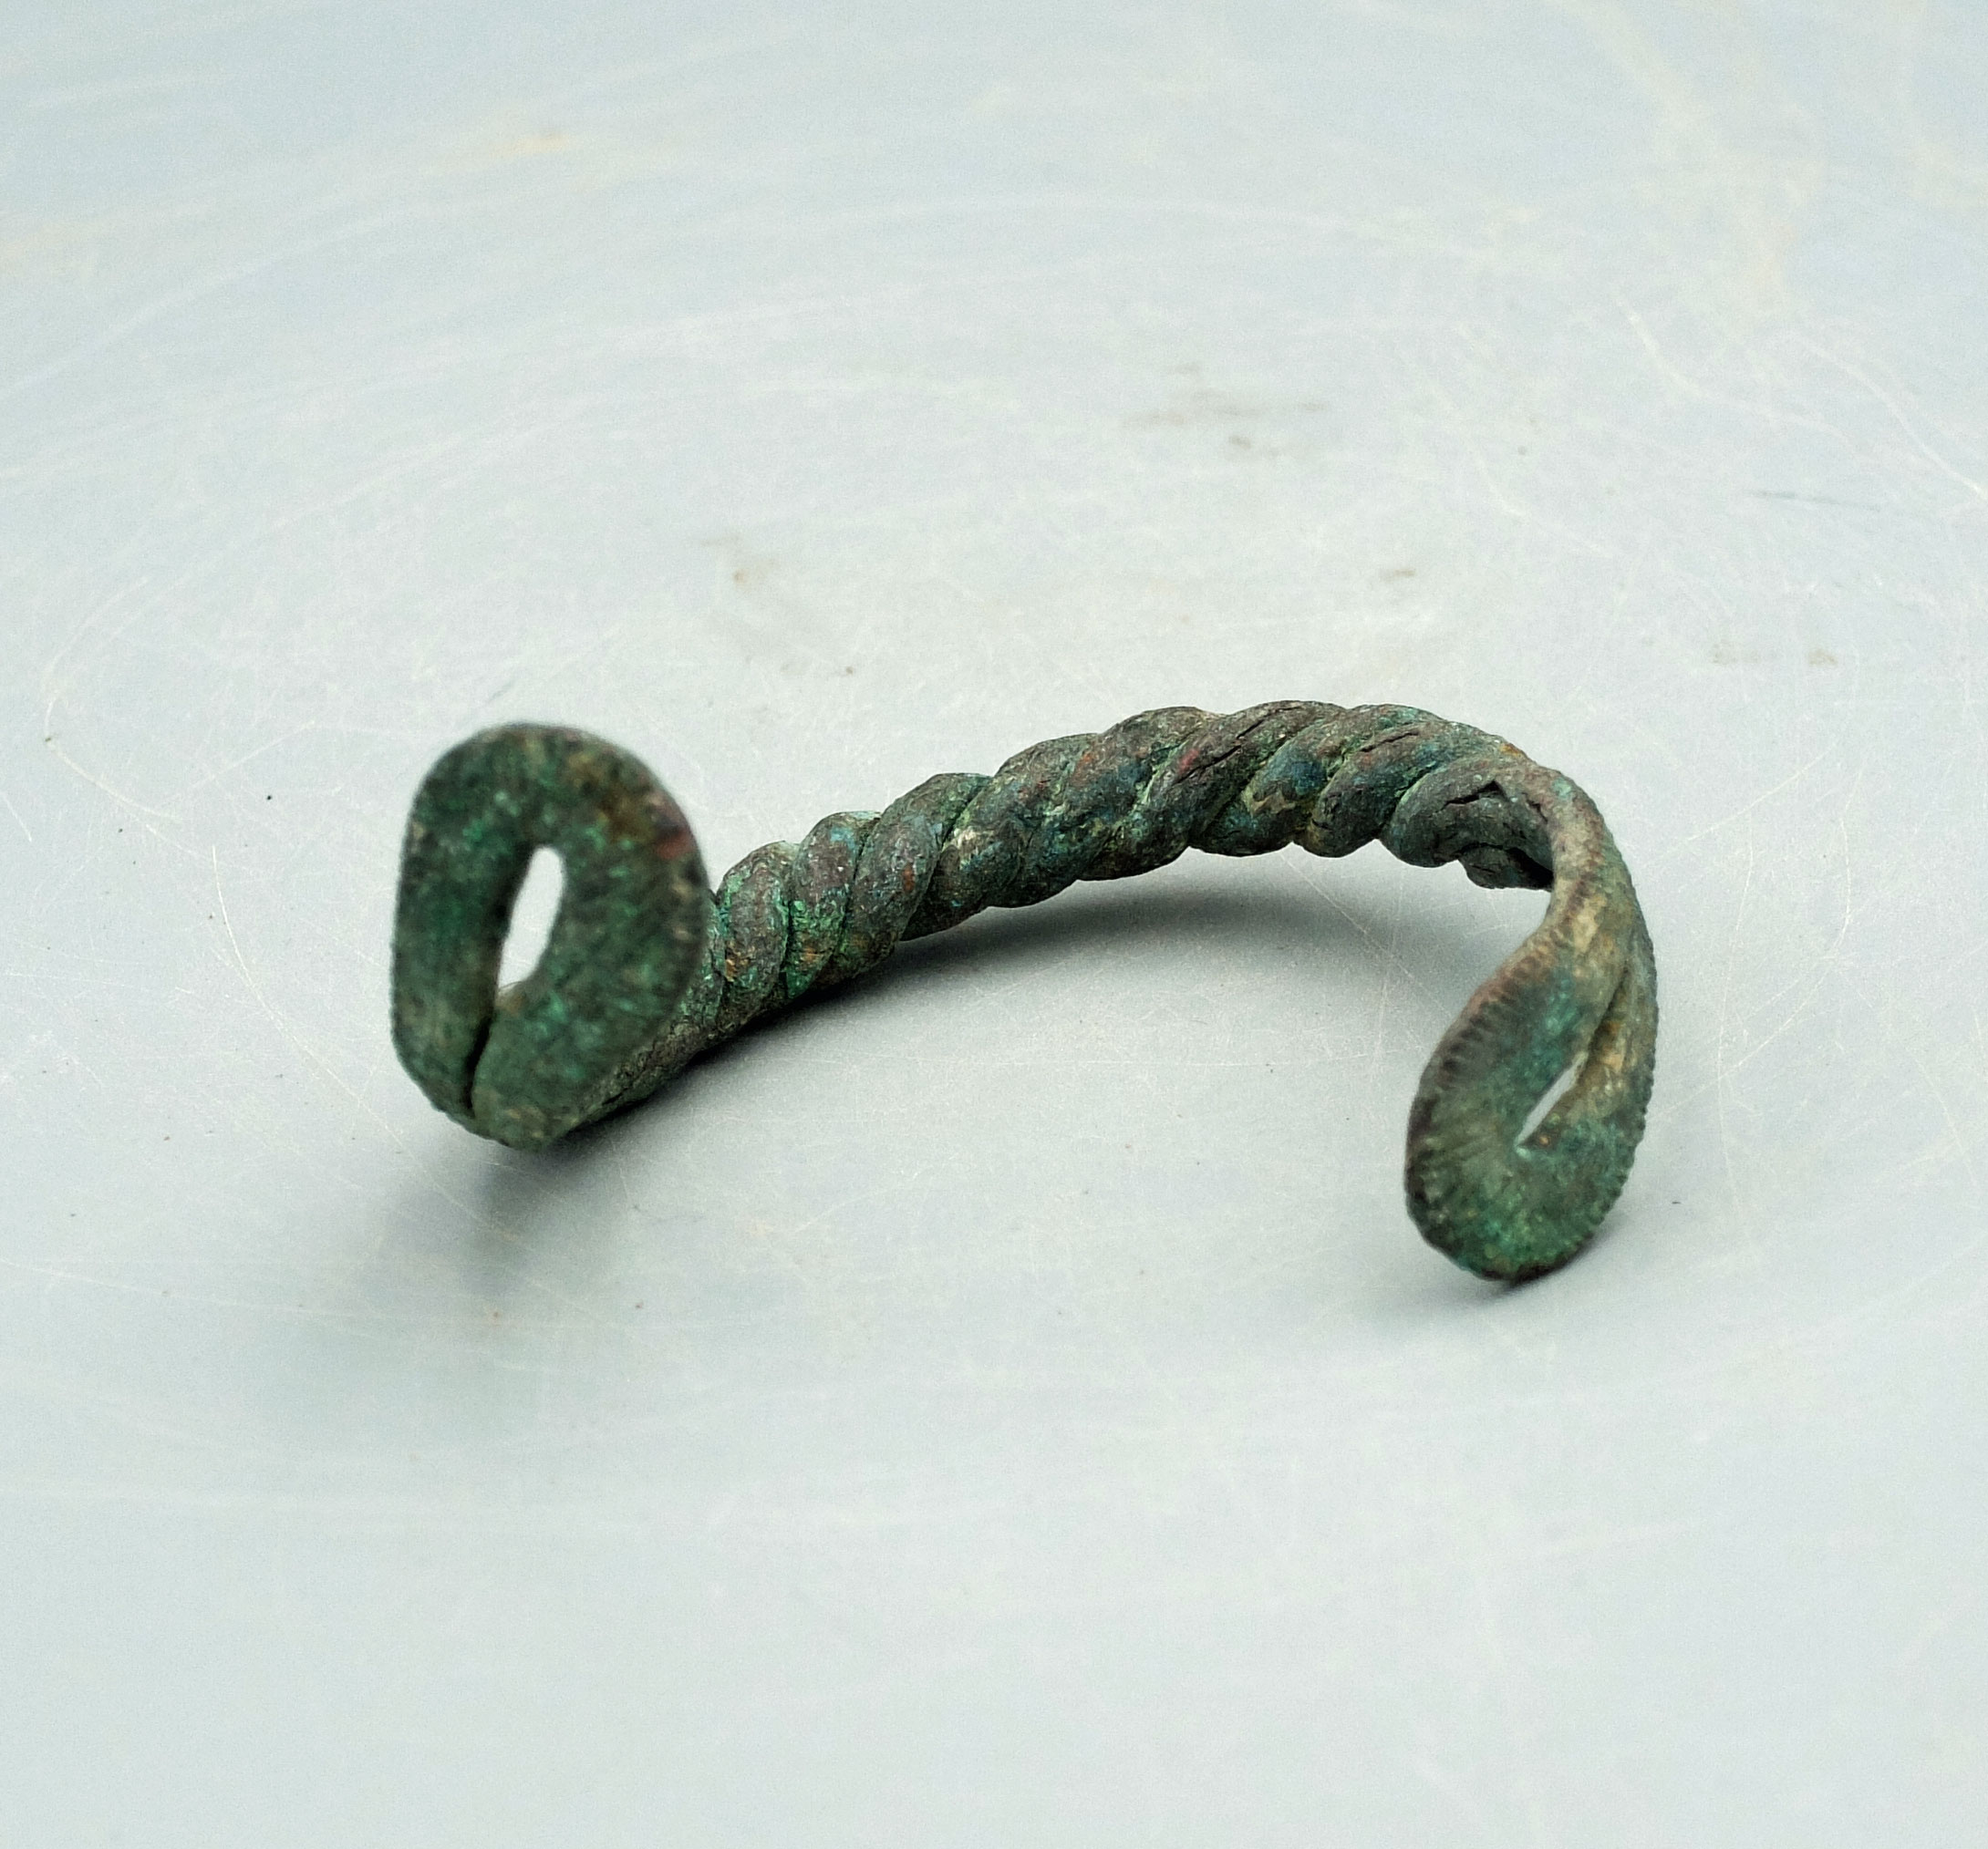 A lovely bronze bracelet from Luristan, ca. 800 - 200 BC. This beautiful braided example is 3 inches